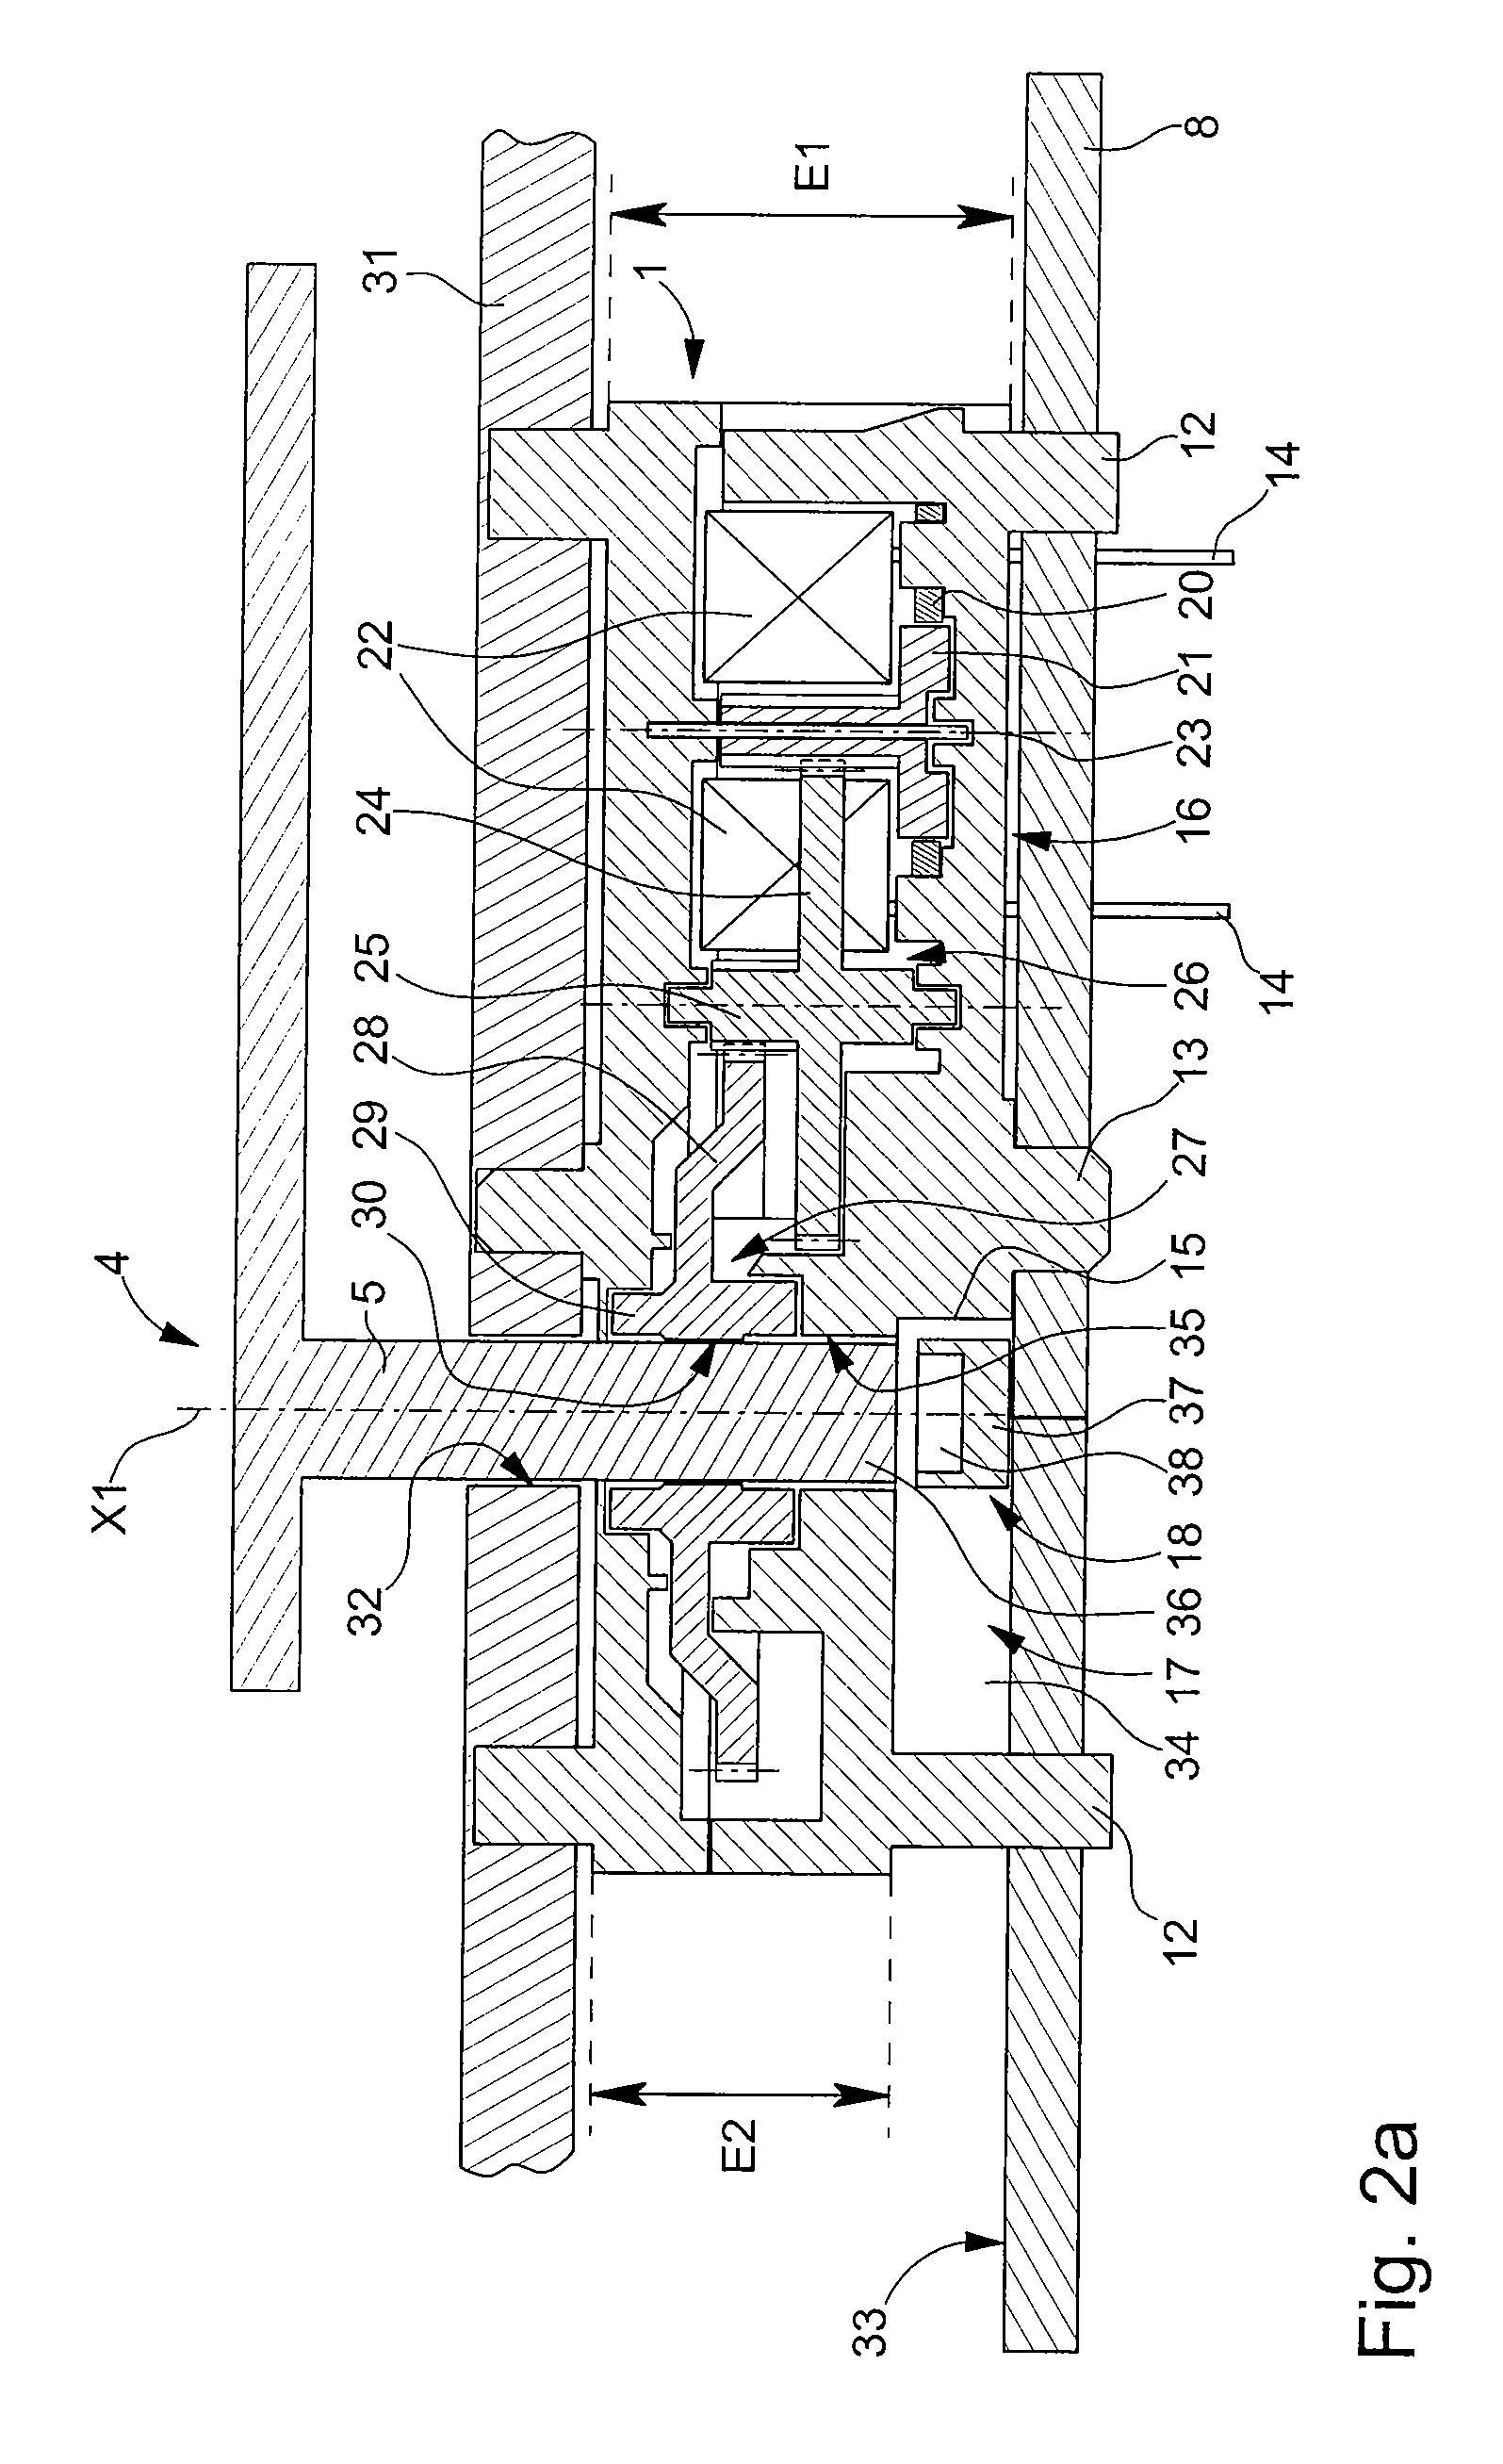 Micromotor structure for hand indicator device